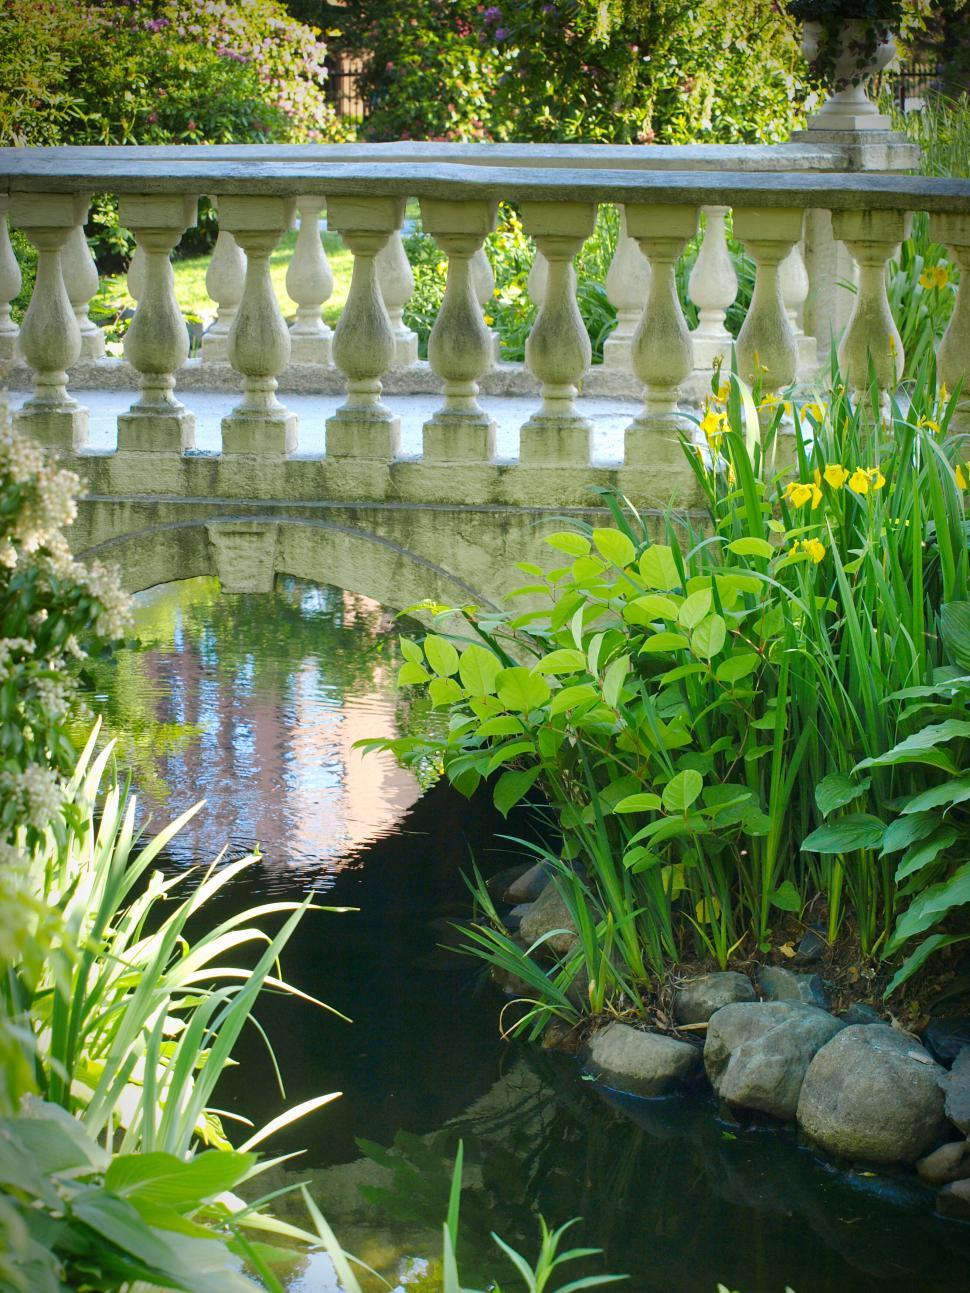 Free Image of Tranquil garden scene with ornate balustrade 